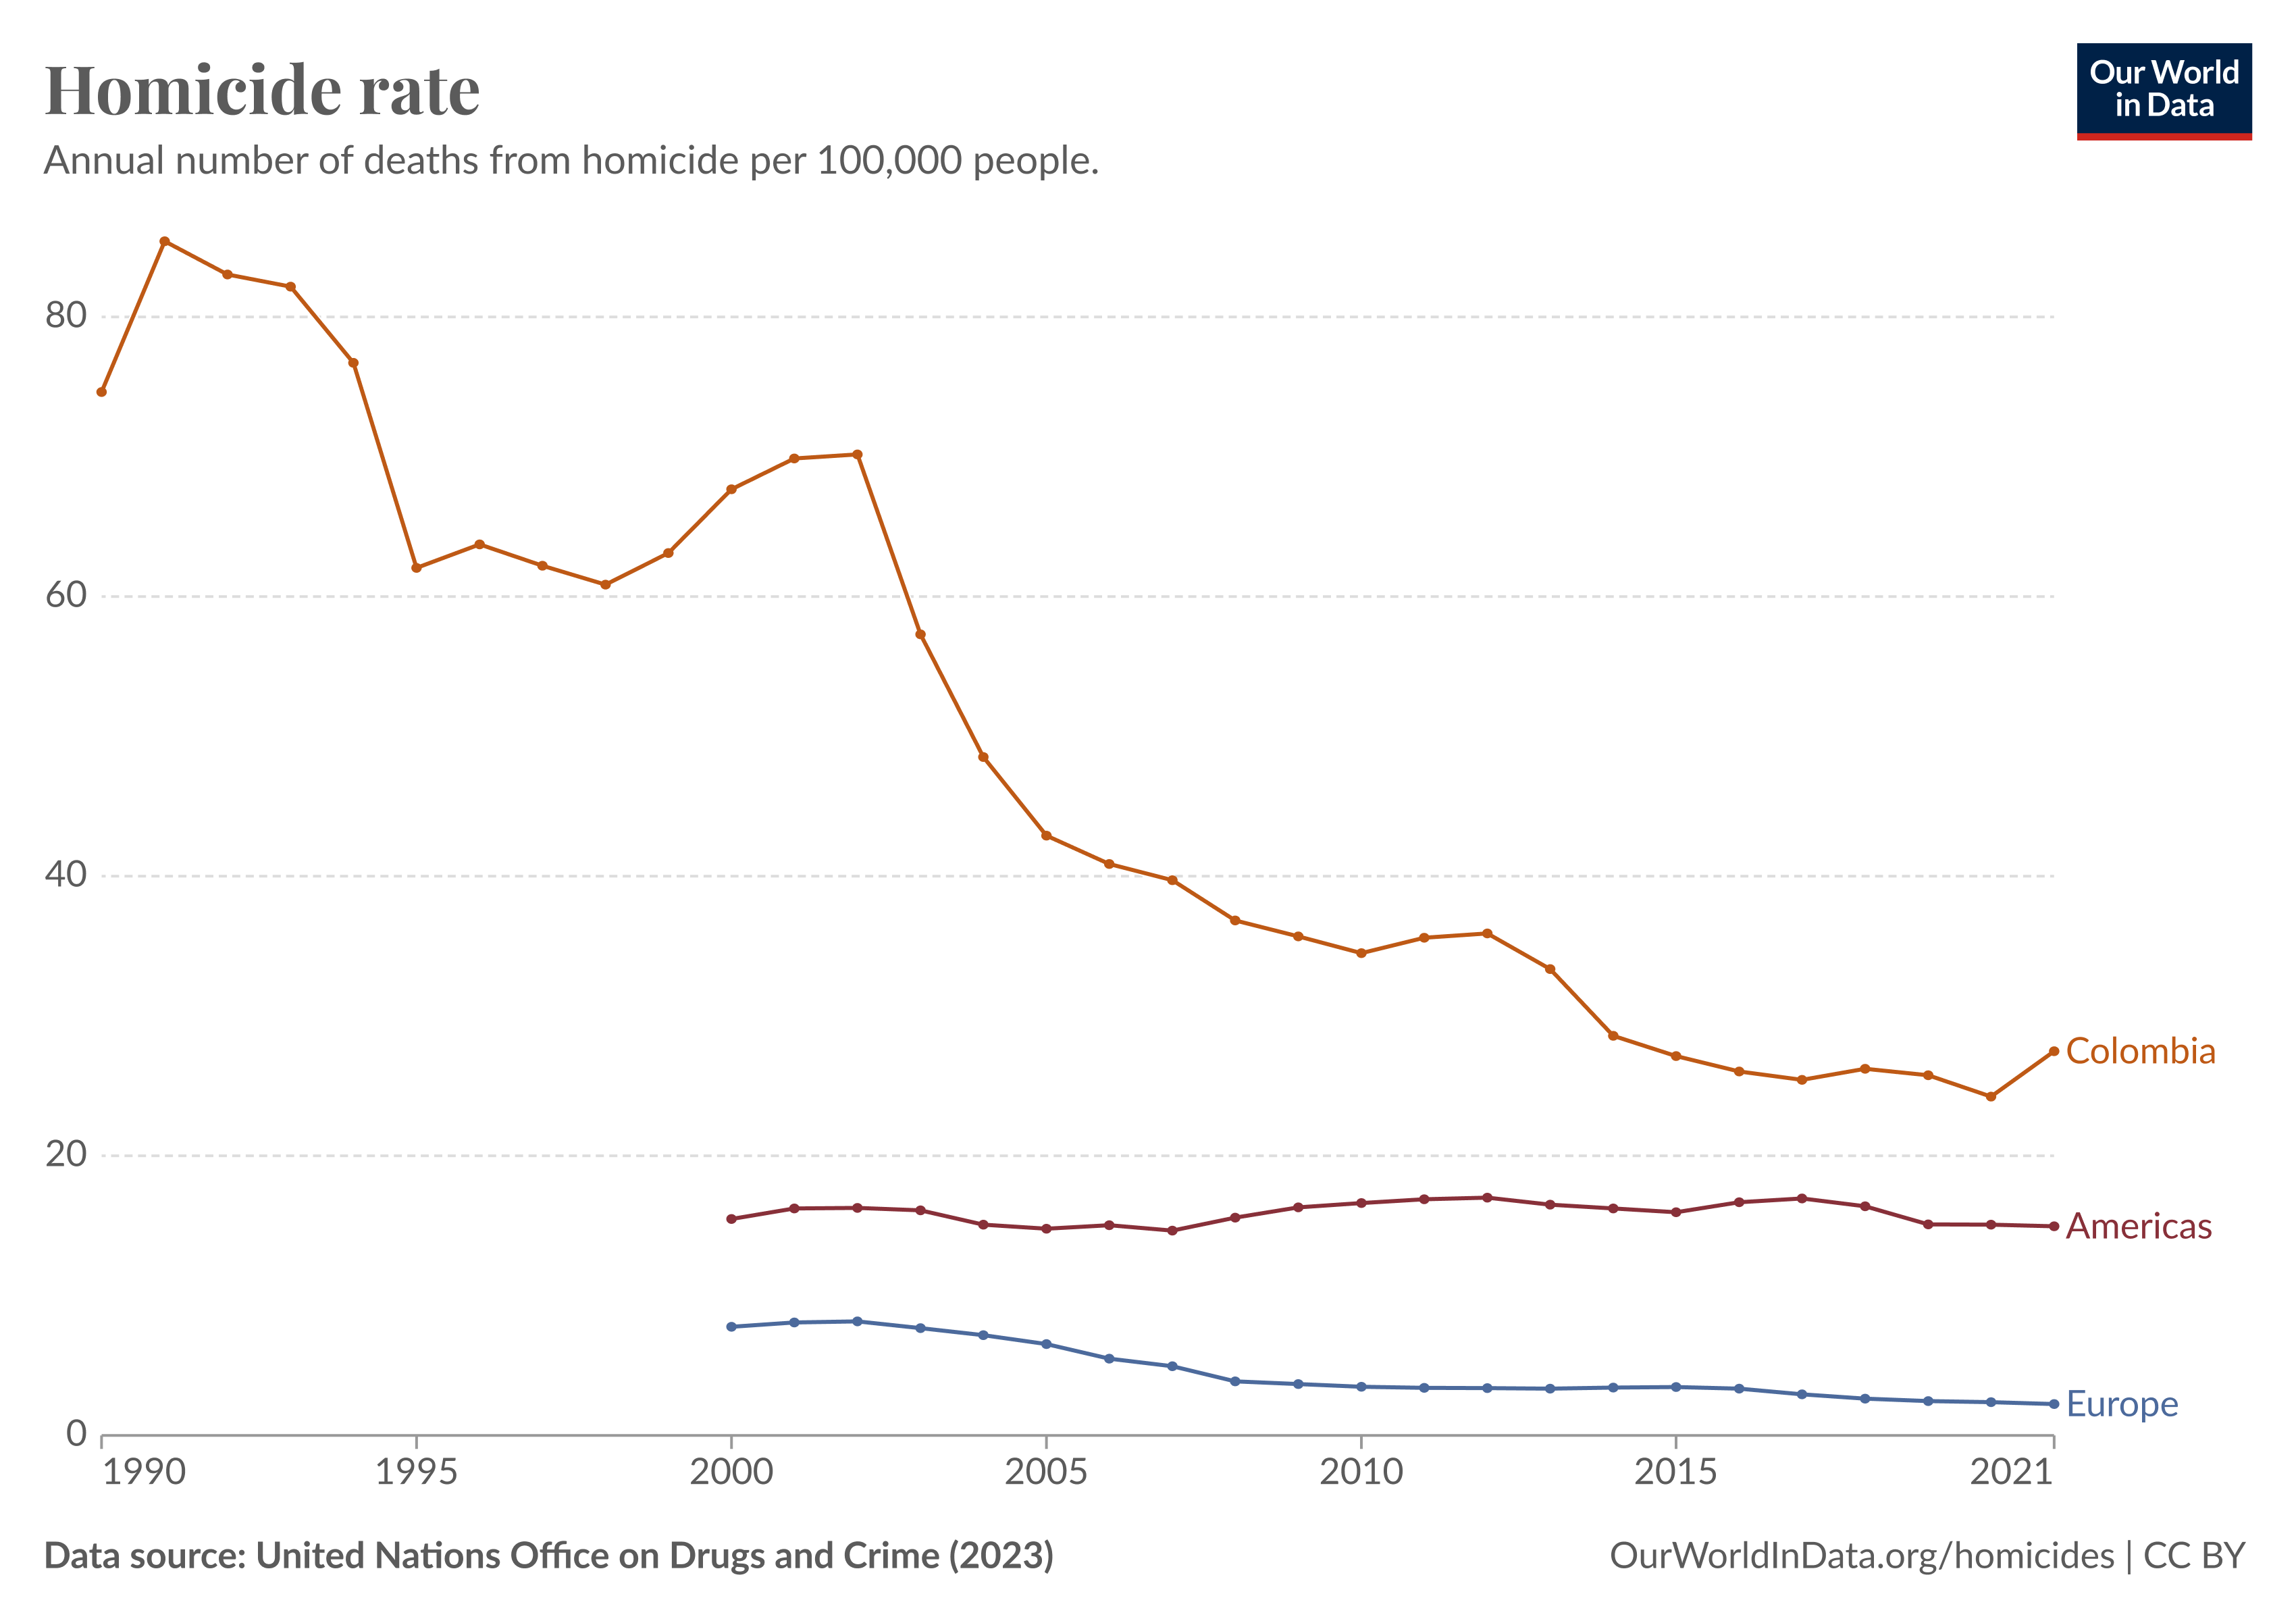 Line chart showing that Colombia's homicide rate has halved in recent decades, and is now much closer to the rates of the Americas and Europe (even though those are still much lower).